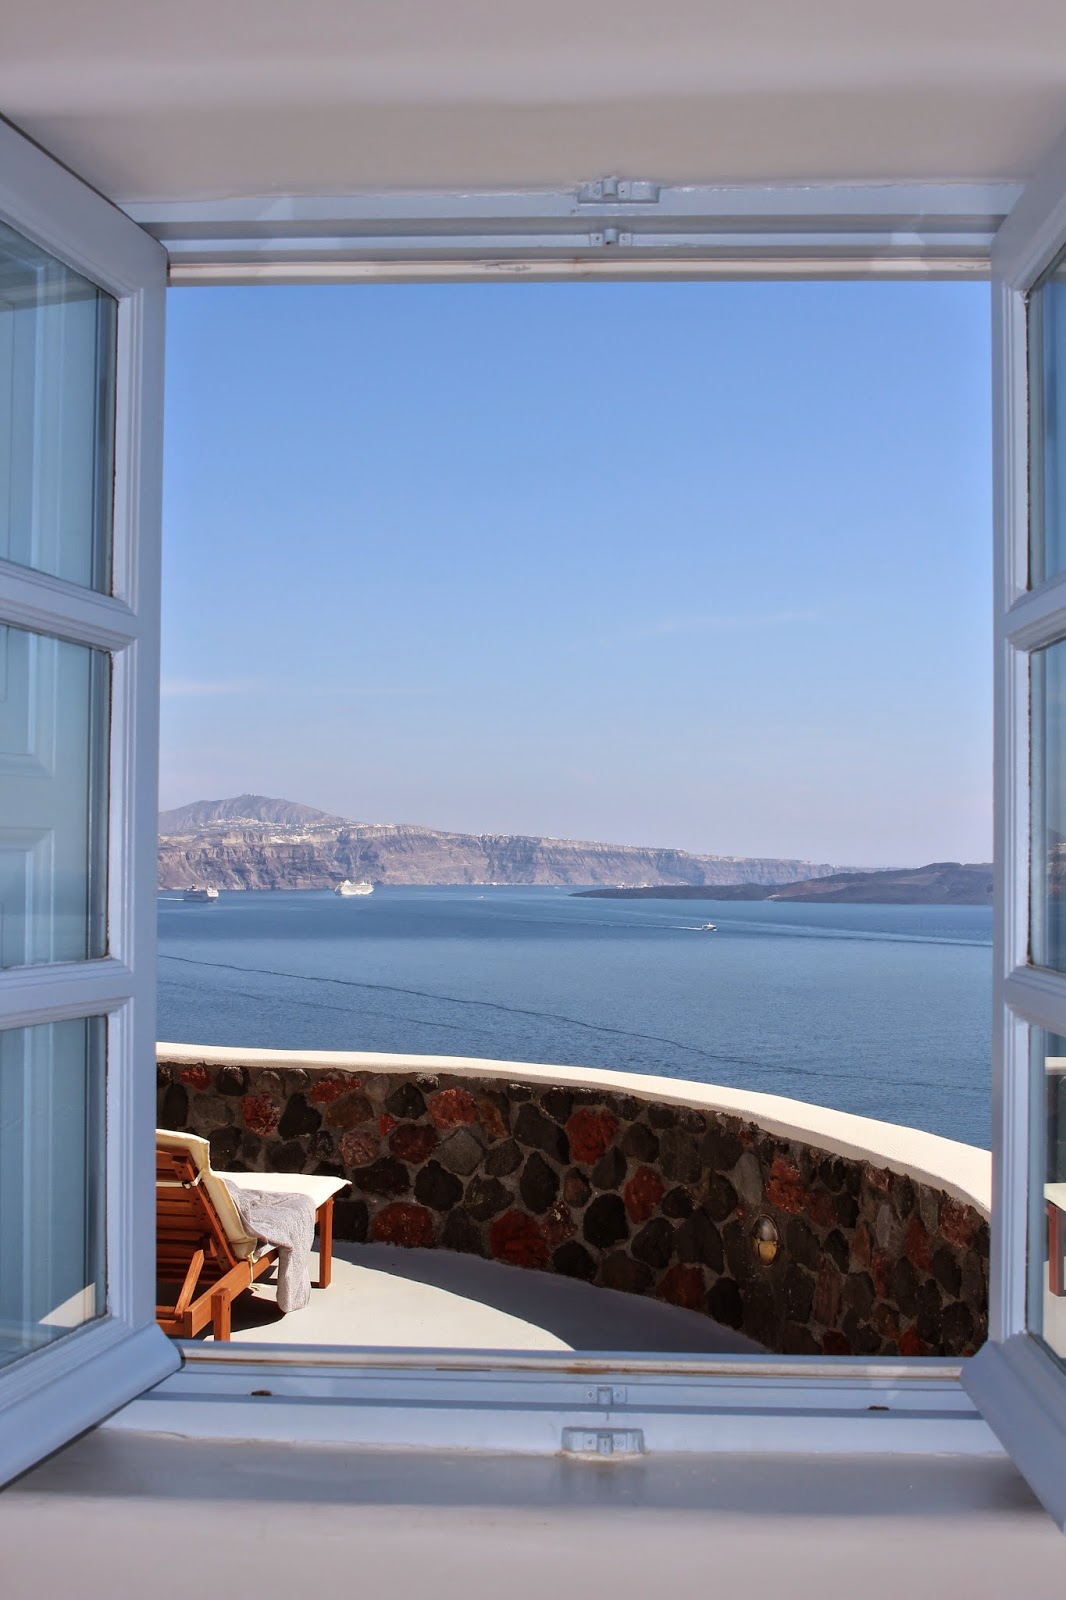 Oia and Pezoules: Where to stay on the Island of Santorini